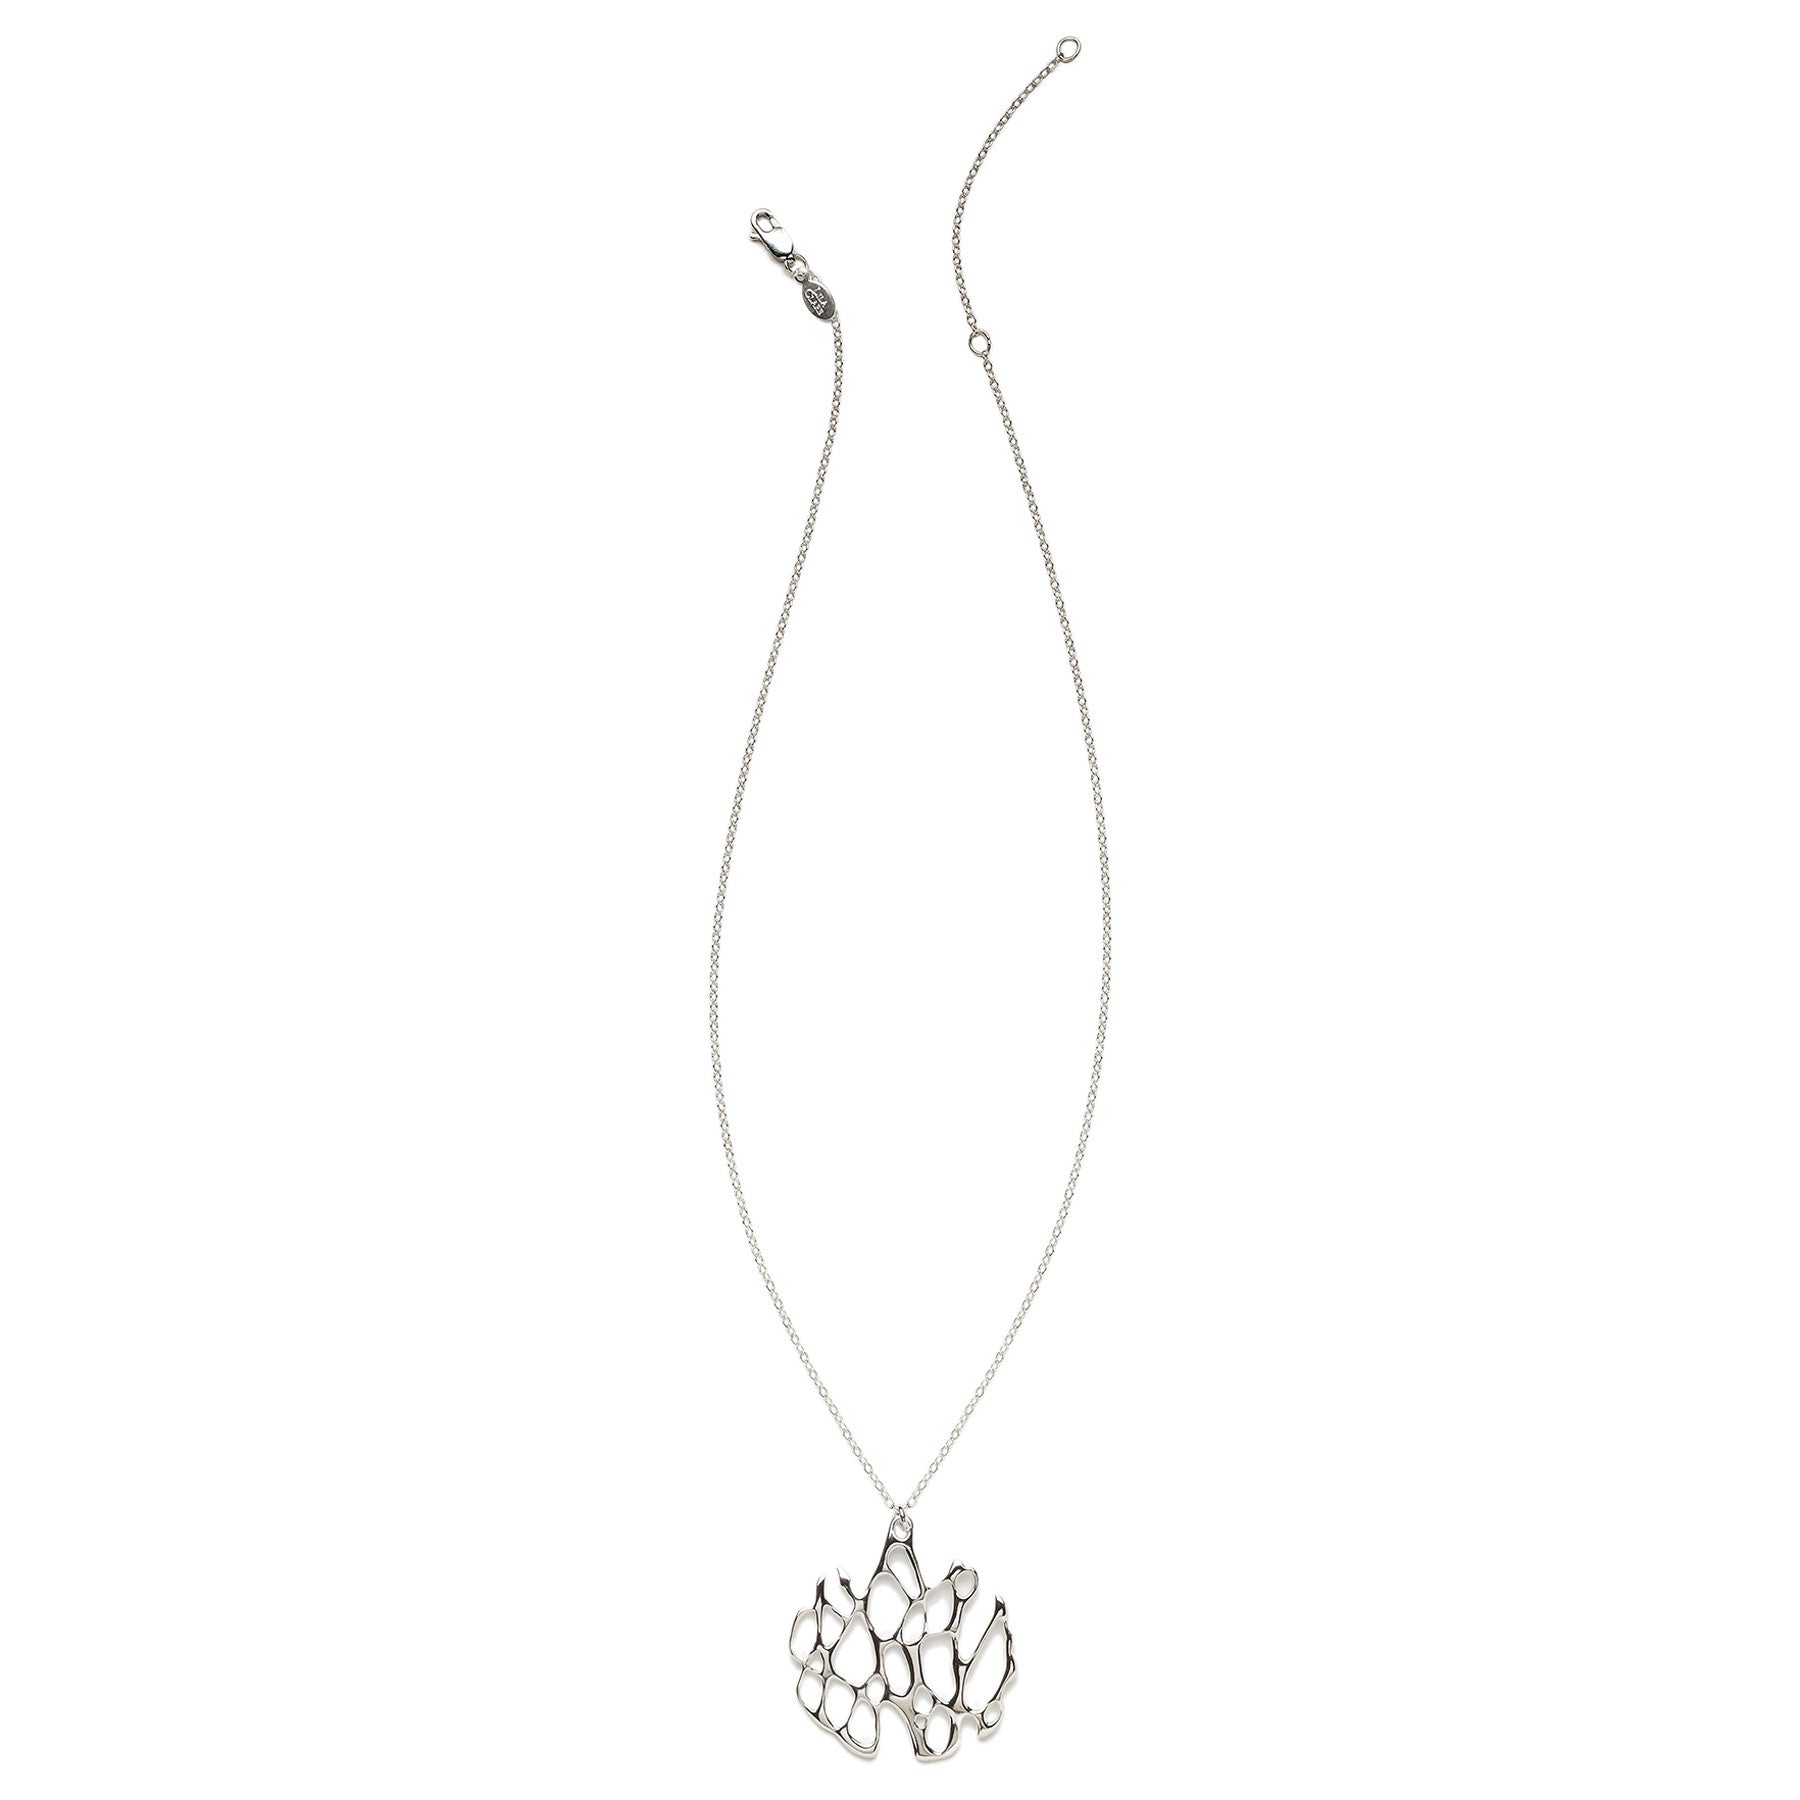 silver cactus necklace with silver chain on white background